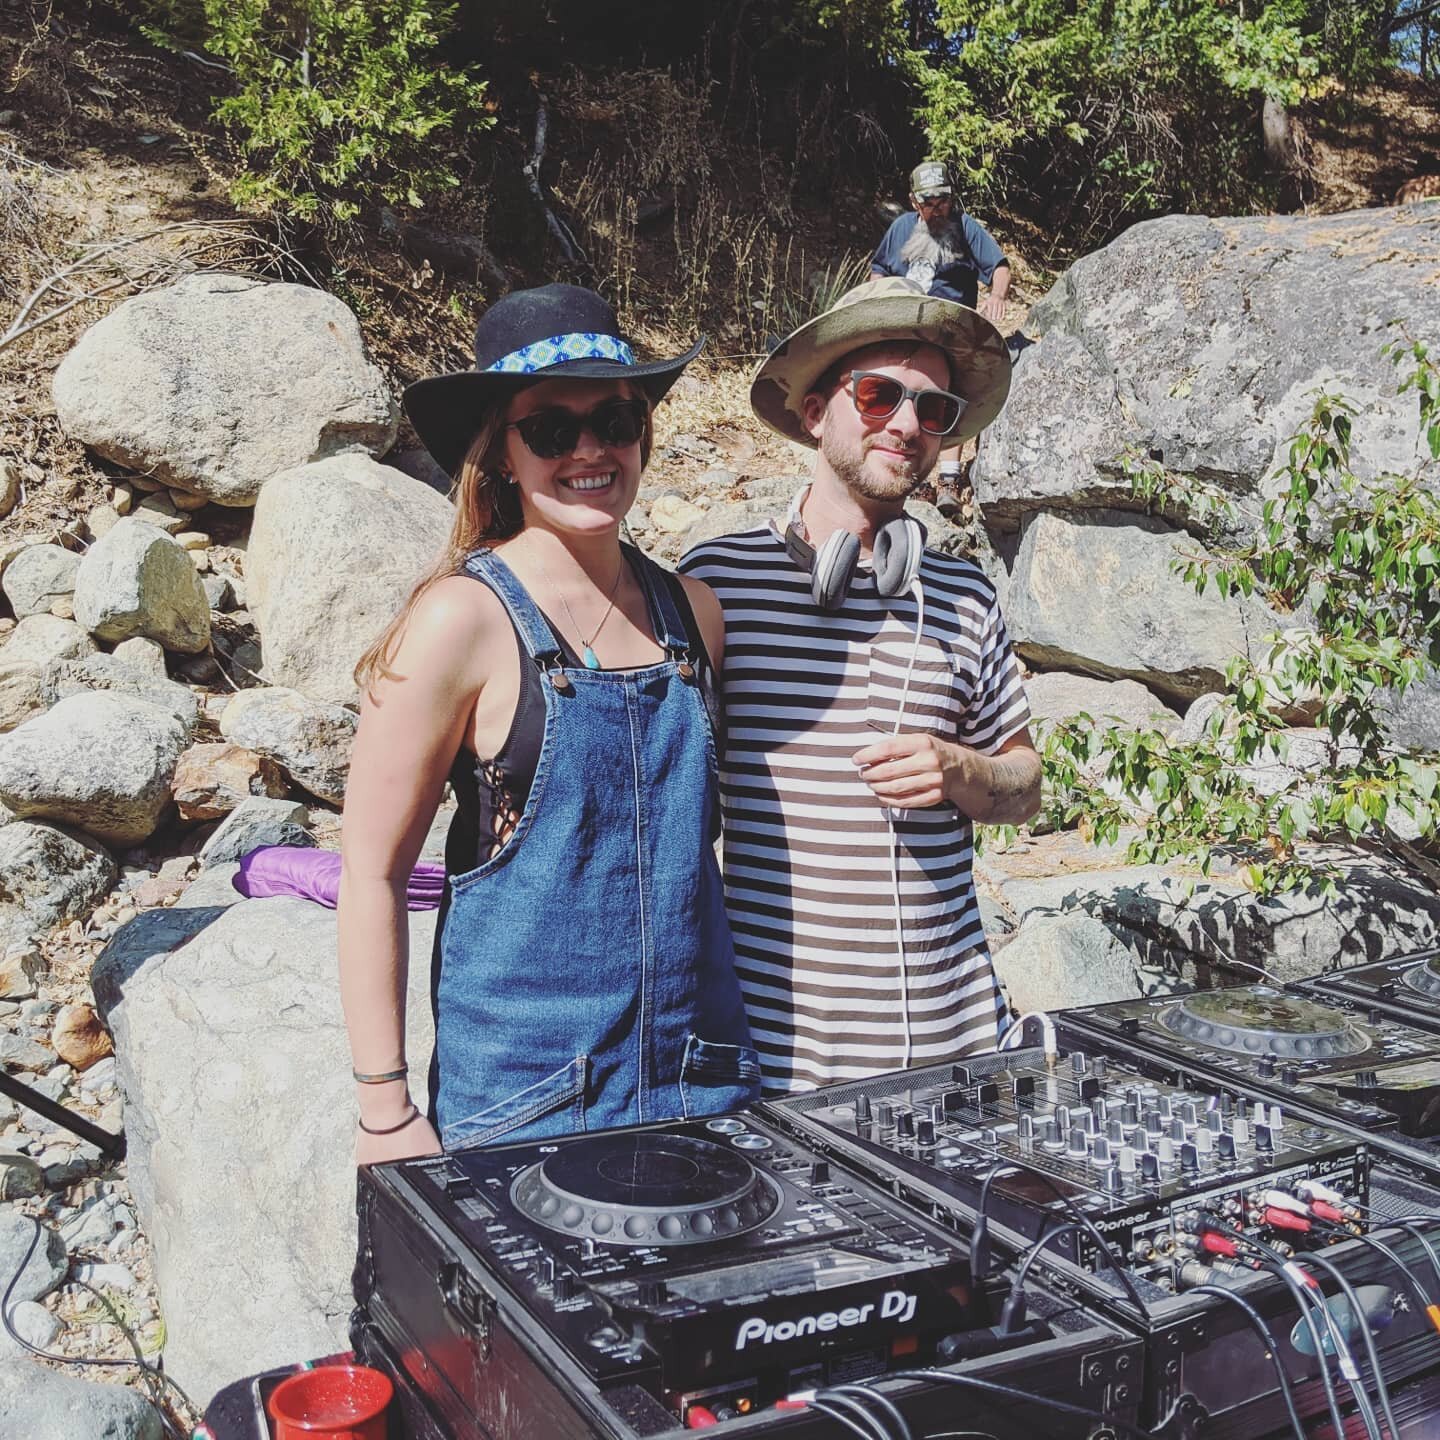 Find some friends who will drag your speakers down to the confluence of a river to groove and glimmer in the last days of summer.🌞

#hogdown